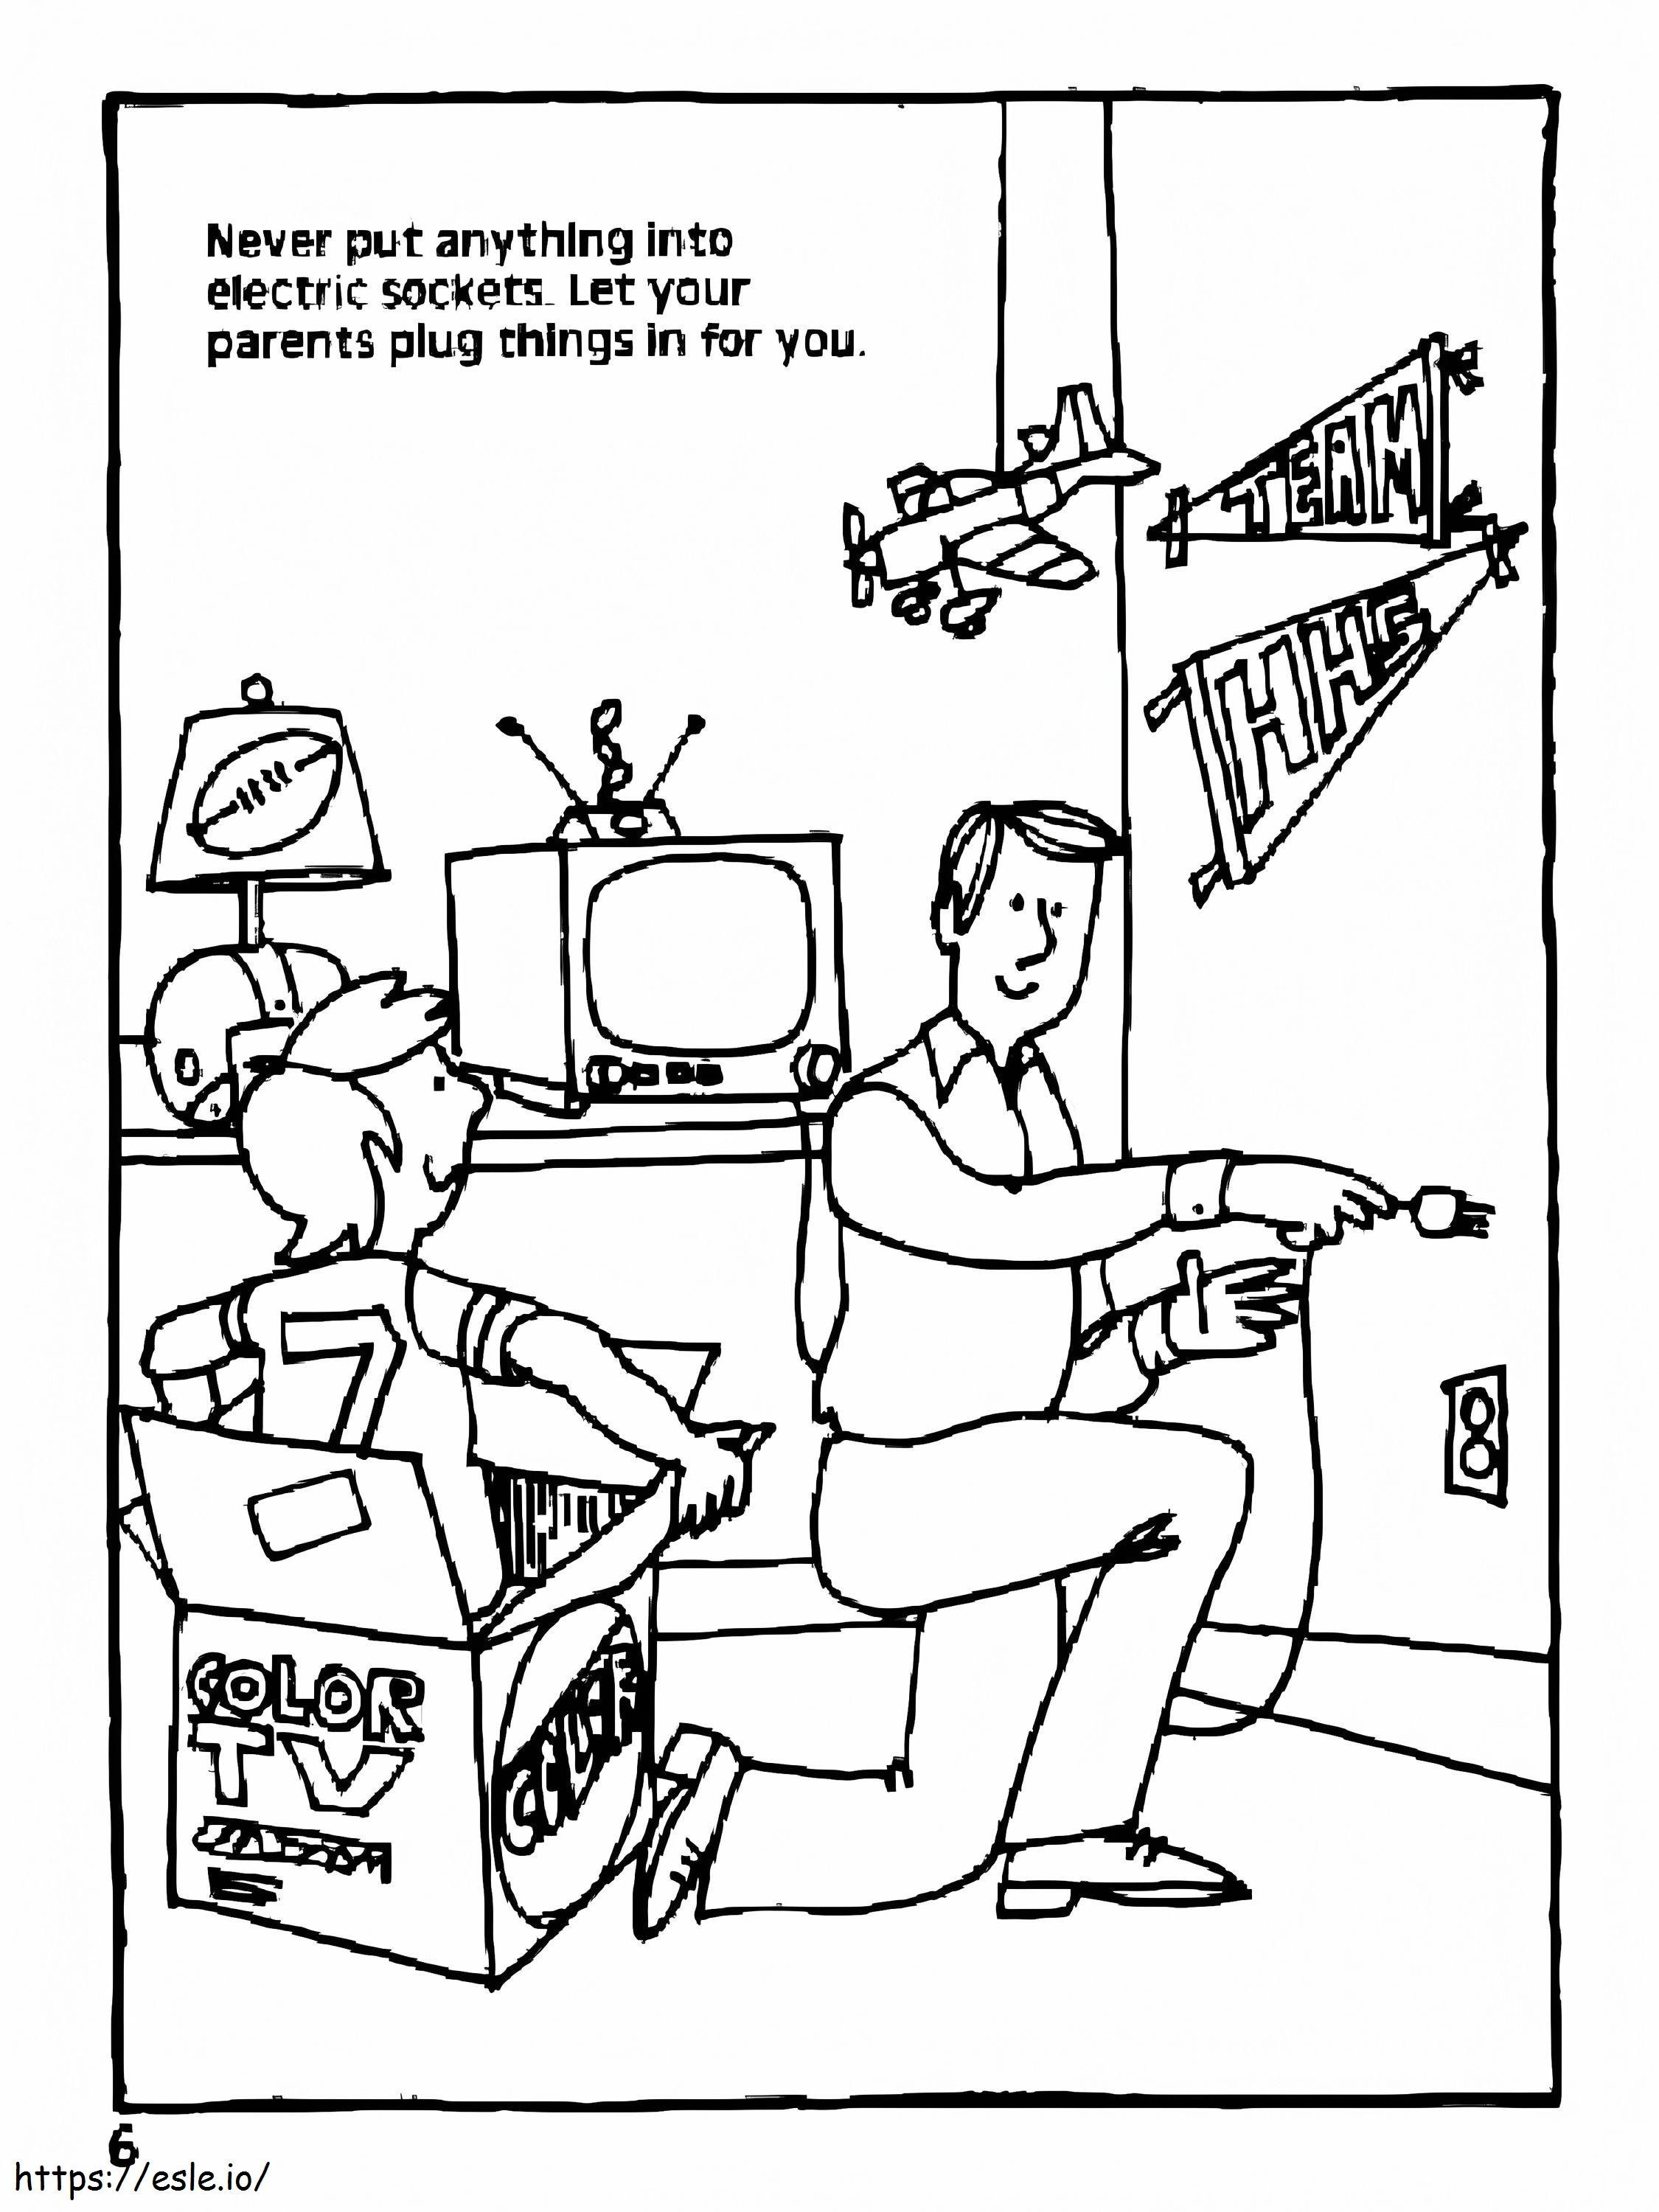 Electrical Safety 1 coloring page